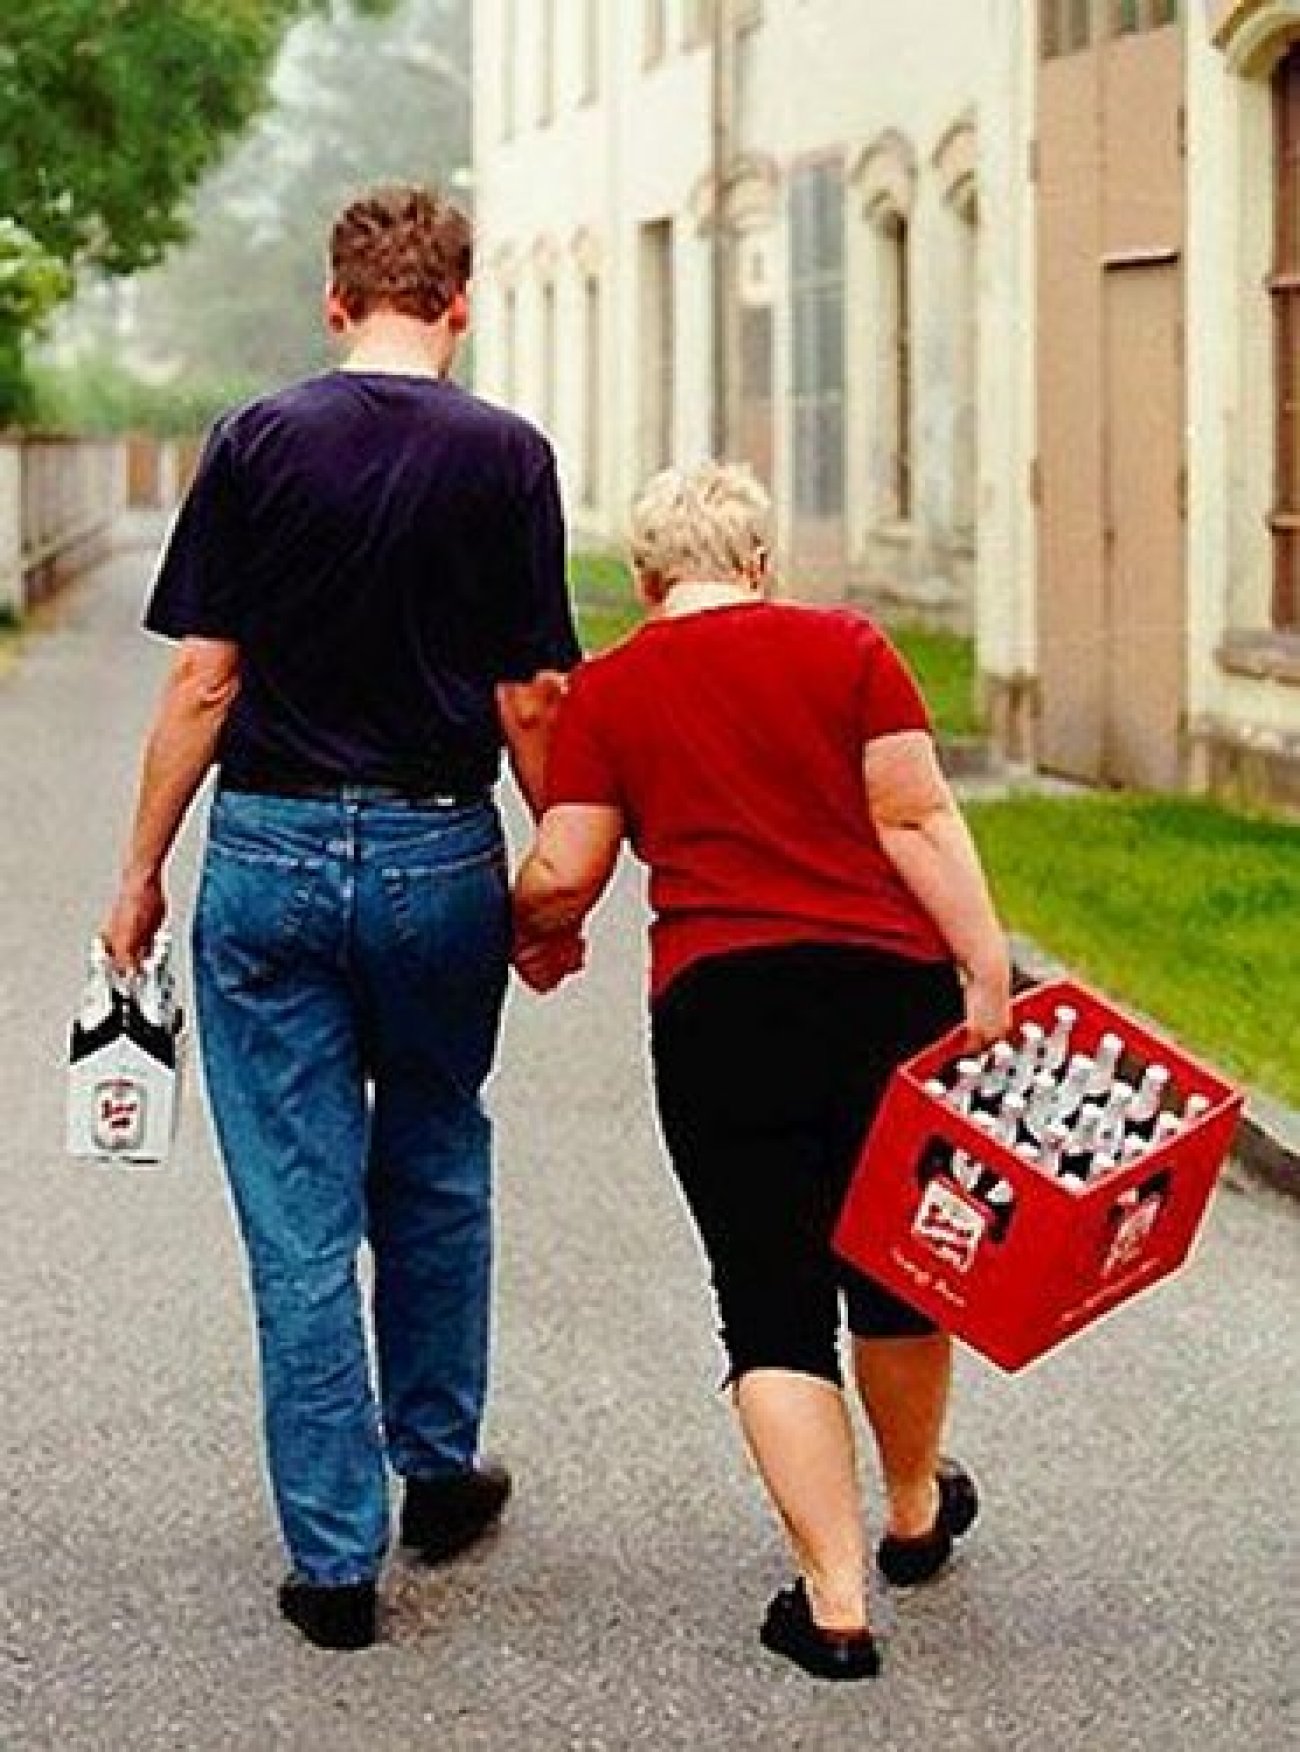 Couple With Beer Crate Funny Image